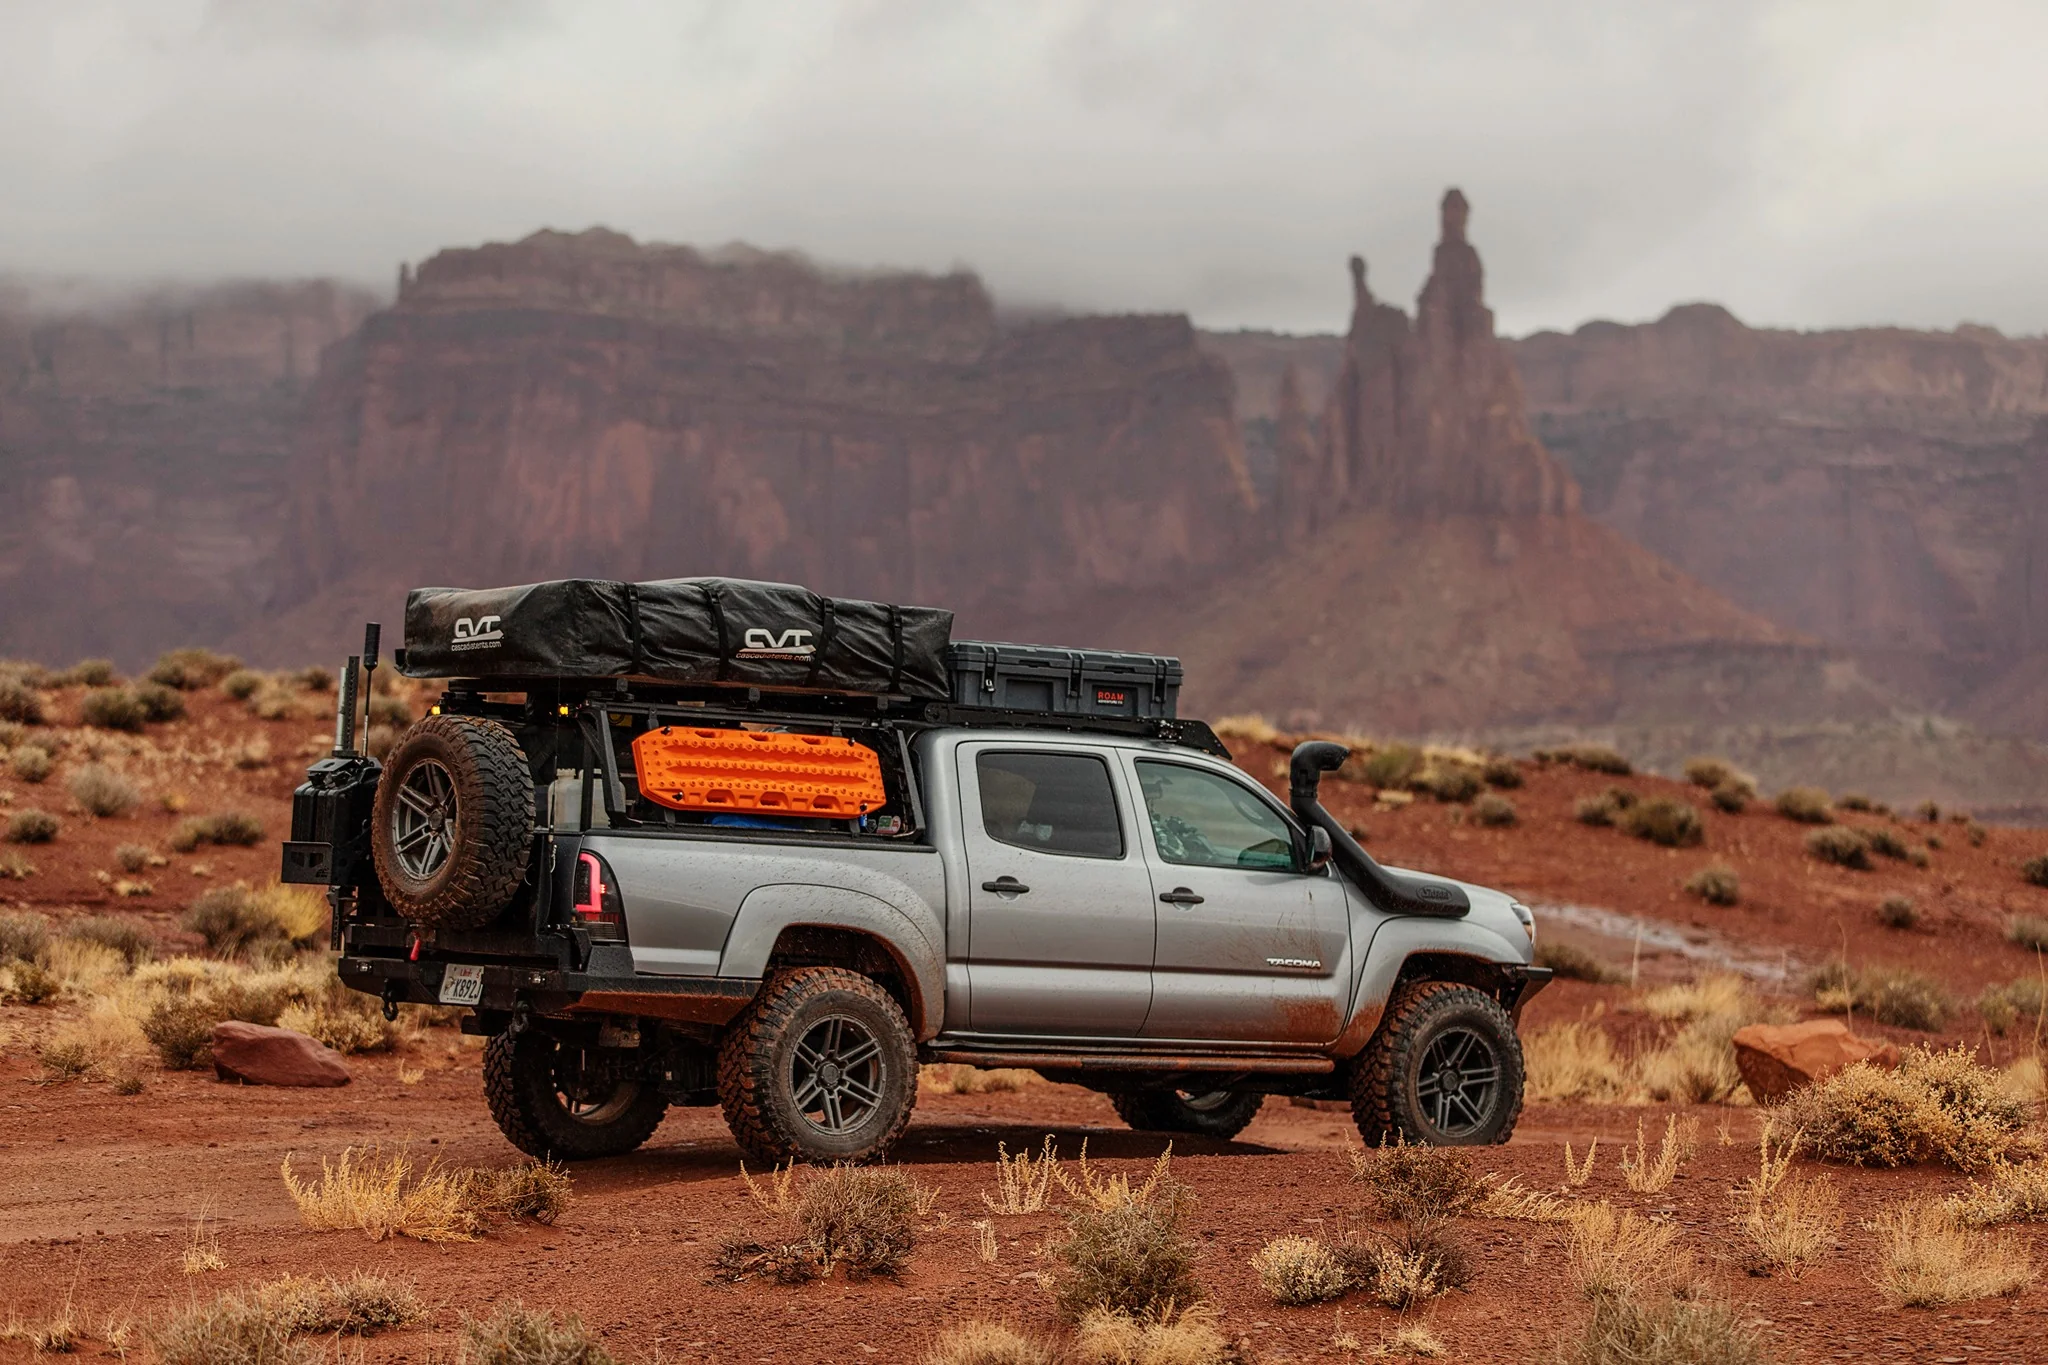 Grey Tacoma with off-road tires, overlanding gear, fuel cans, and tent rack in Utah desert.